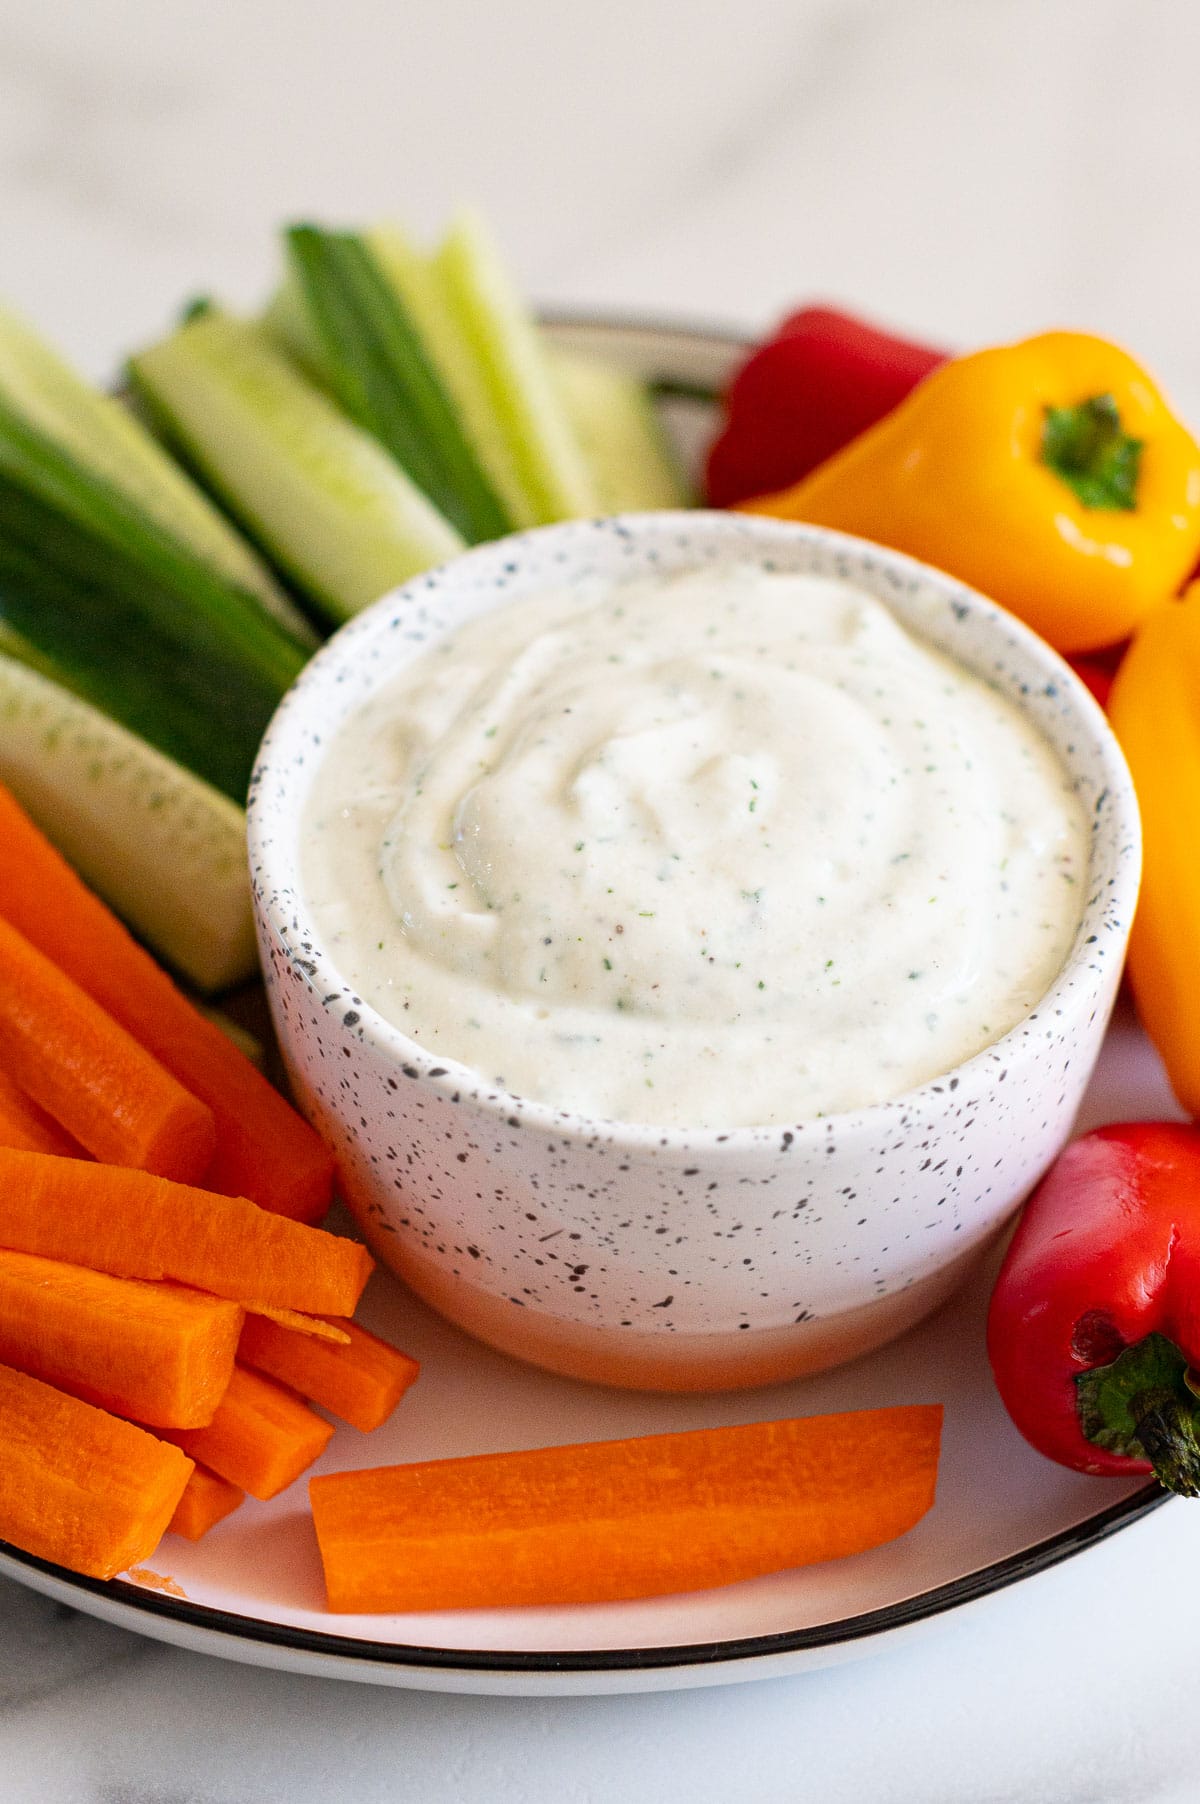 Cottage cheese ranch dip served with vegetables on a platter.